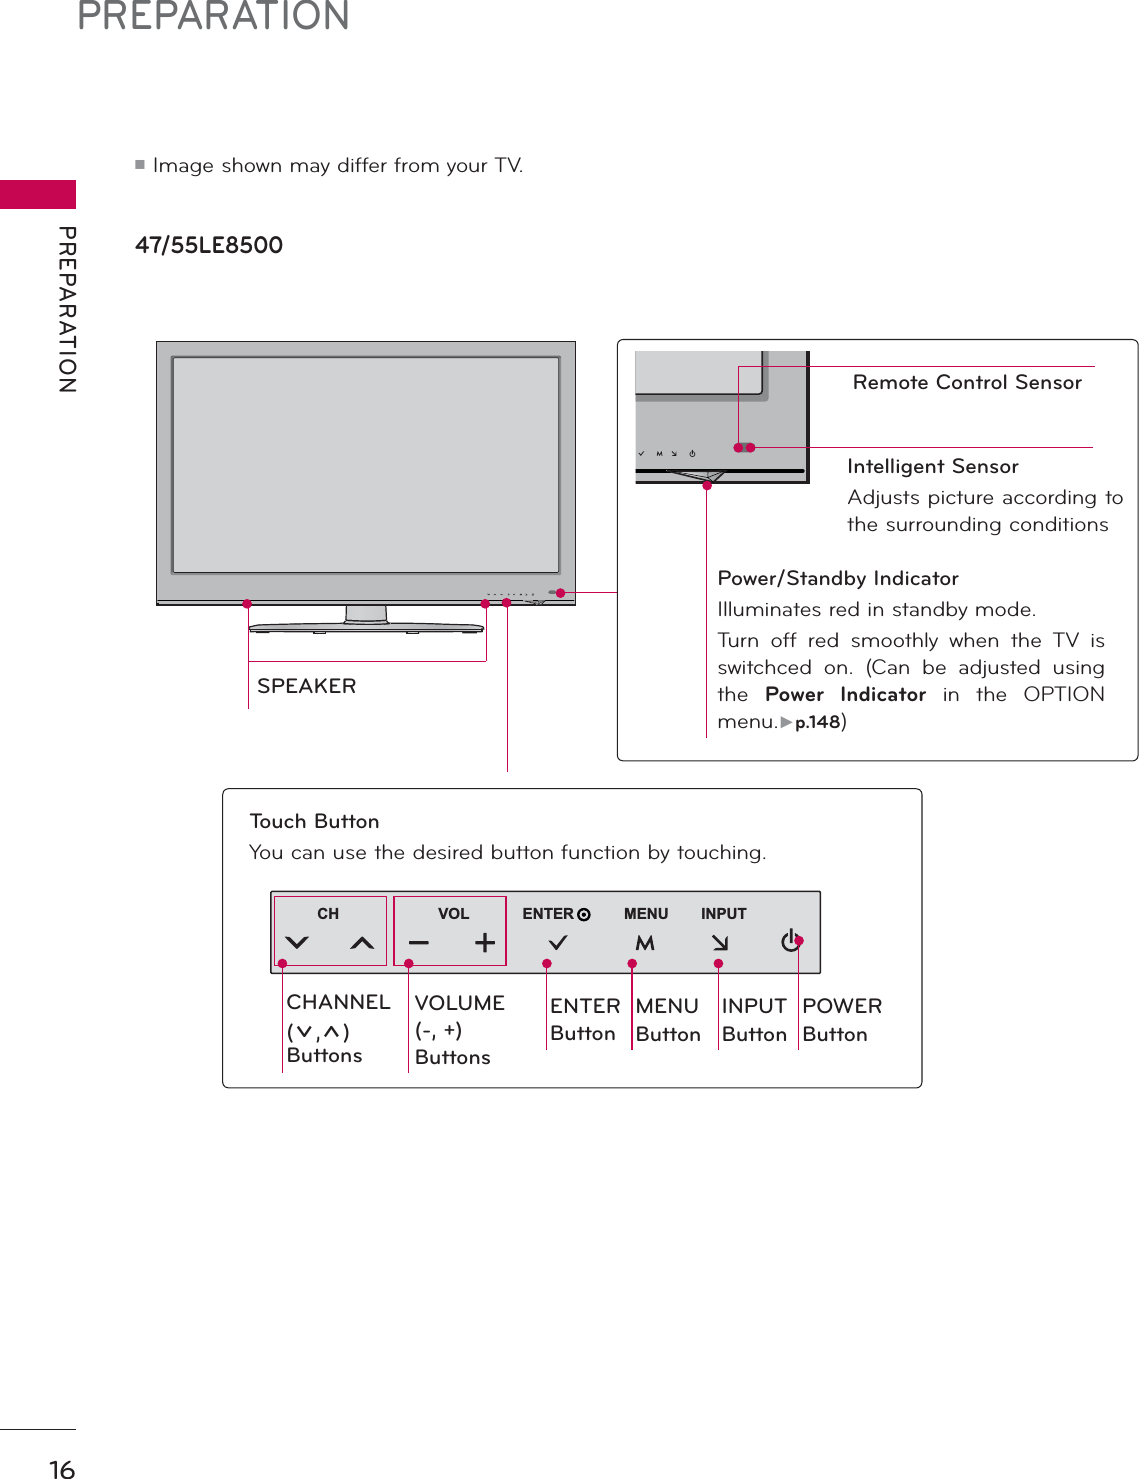 PREPARATIONPREPARATION16ᯫImage shown may differ from your TV.47/55LE8500SPEAKERPower/Standby IndicatorIlluminates red in standby mode.Turn off red smoothly when the TV is switchced on. (Can be adjusted using the Power Indicator in the OPTION menu.Źp.148)VOL ENTERCH MENU INPUTCHANNEL(ᰝ,ᰜ)ButtonsVOLUME (-, +) ButtonsENTERButtonMENUButtonINPUTButtonPOWERButtonTouch ButtonYou can use the desired button function by touching.Remote Control SensorIntelligent SensorAdjusts picture according to the surrounding conditions 